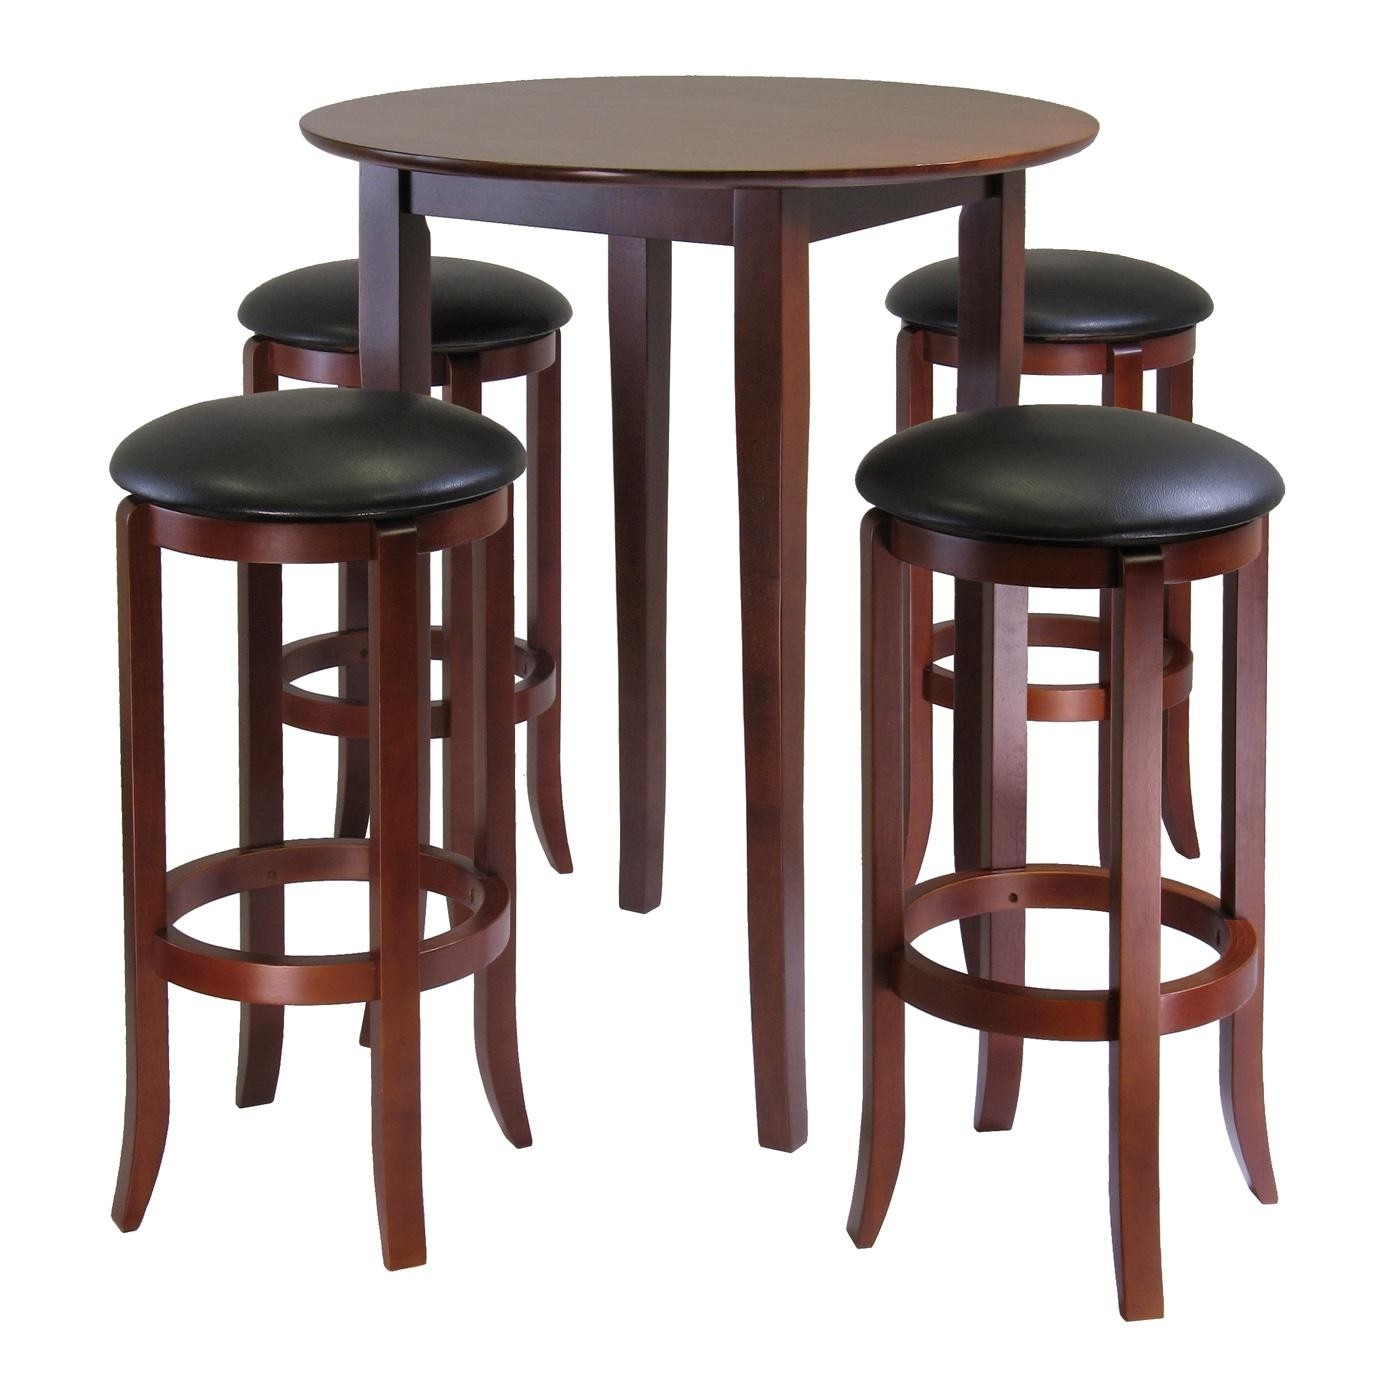 Winsome Fiona 5-Piece Round High Pub Table Set in Antique Walnut Finish